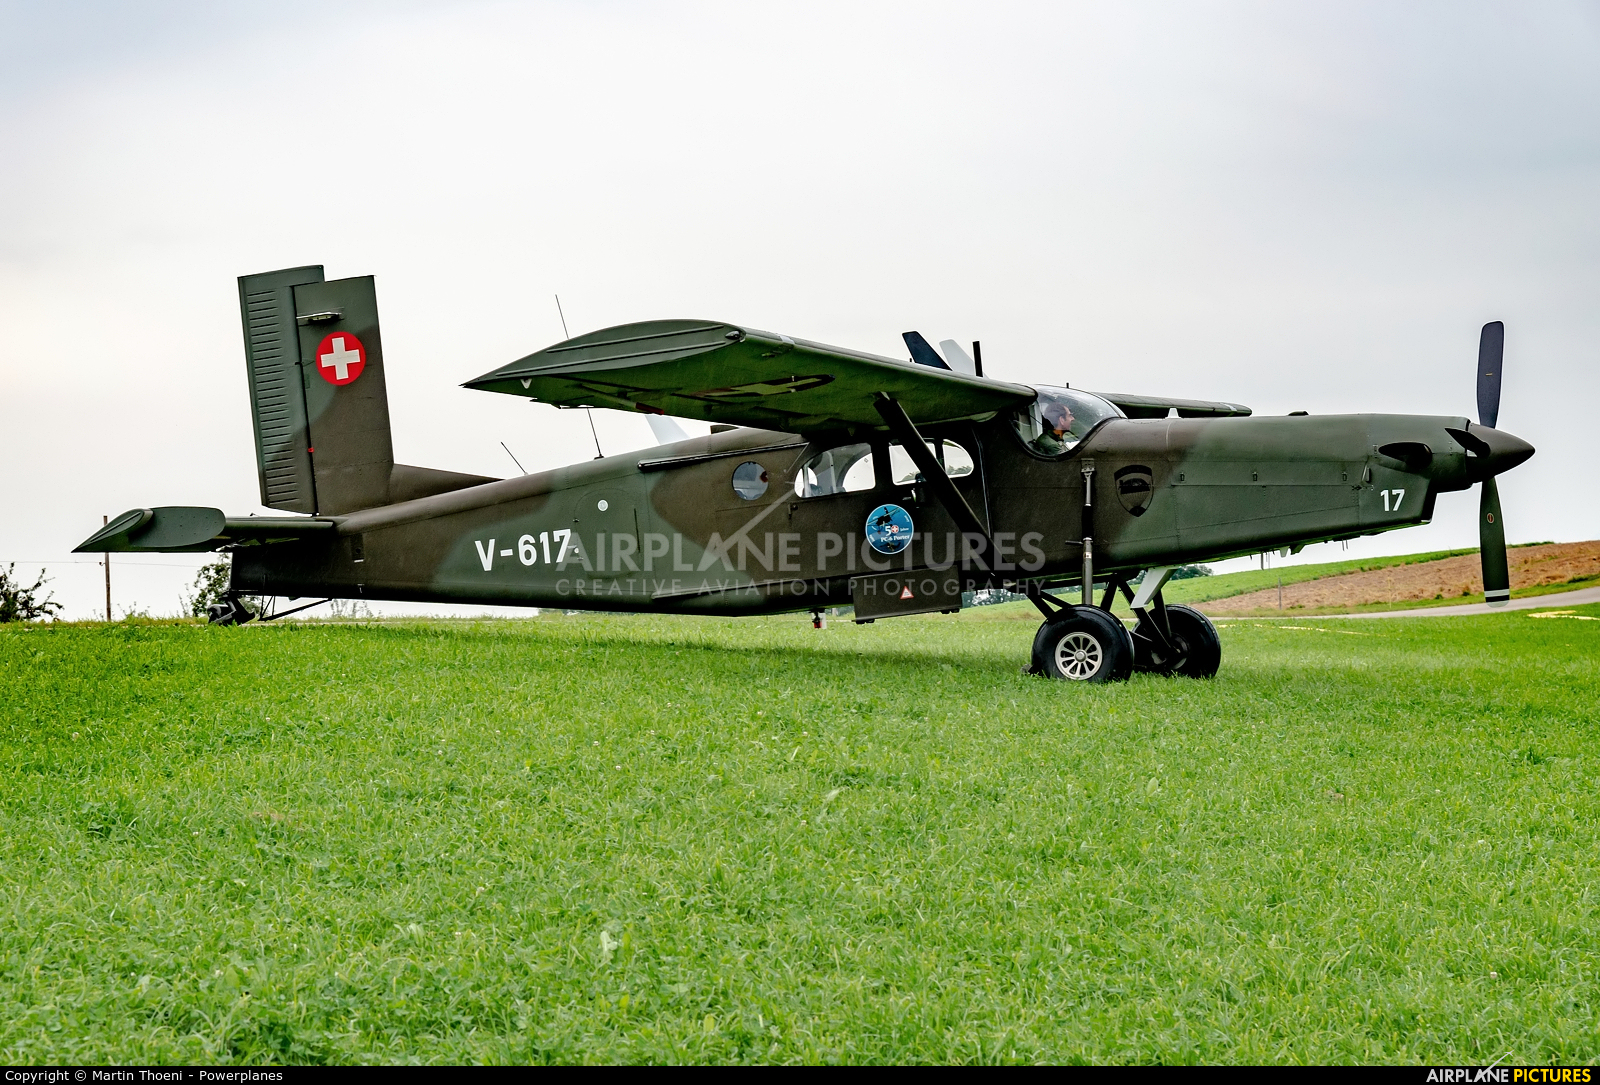 Switzerland - Air Force V-617 aircraft at Off Airport - Switzerland